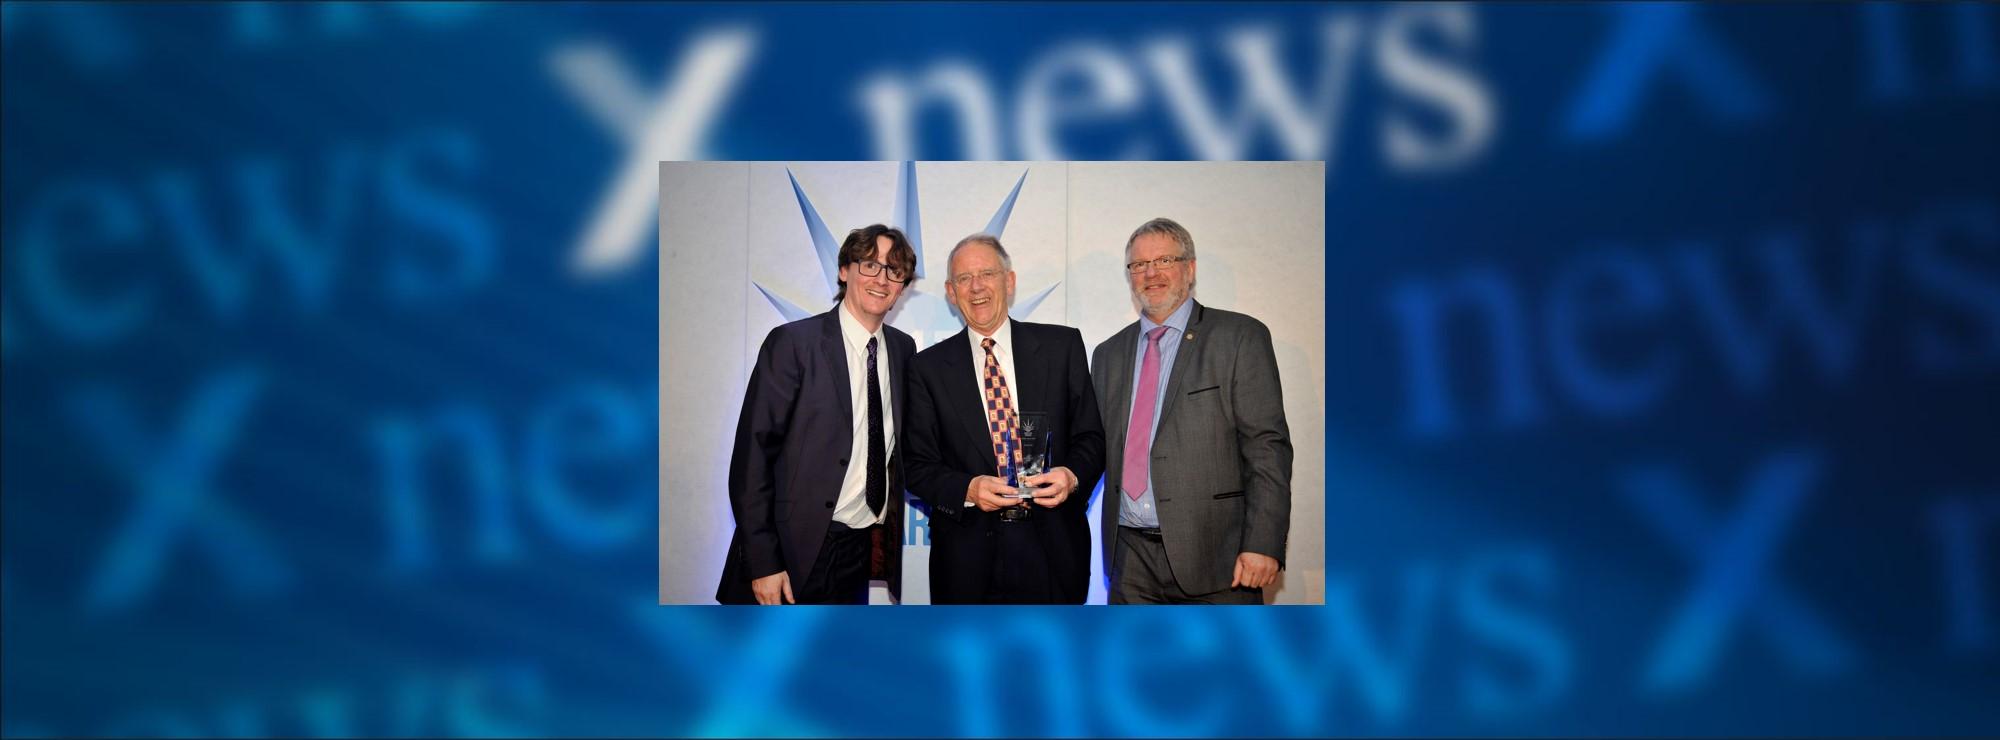 Alan Green recognised by the HVAC industry